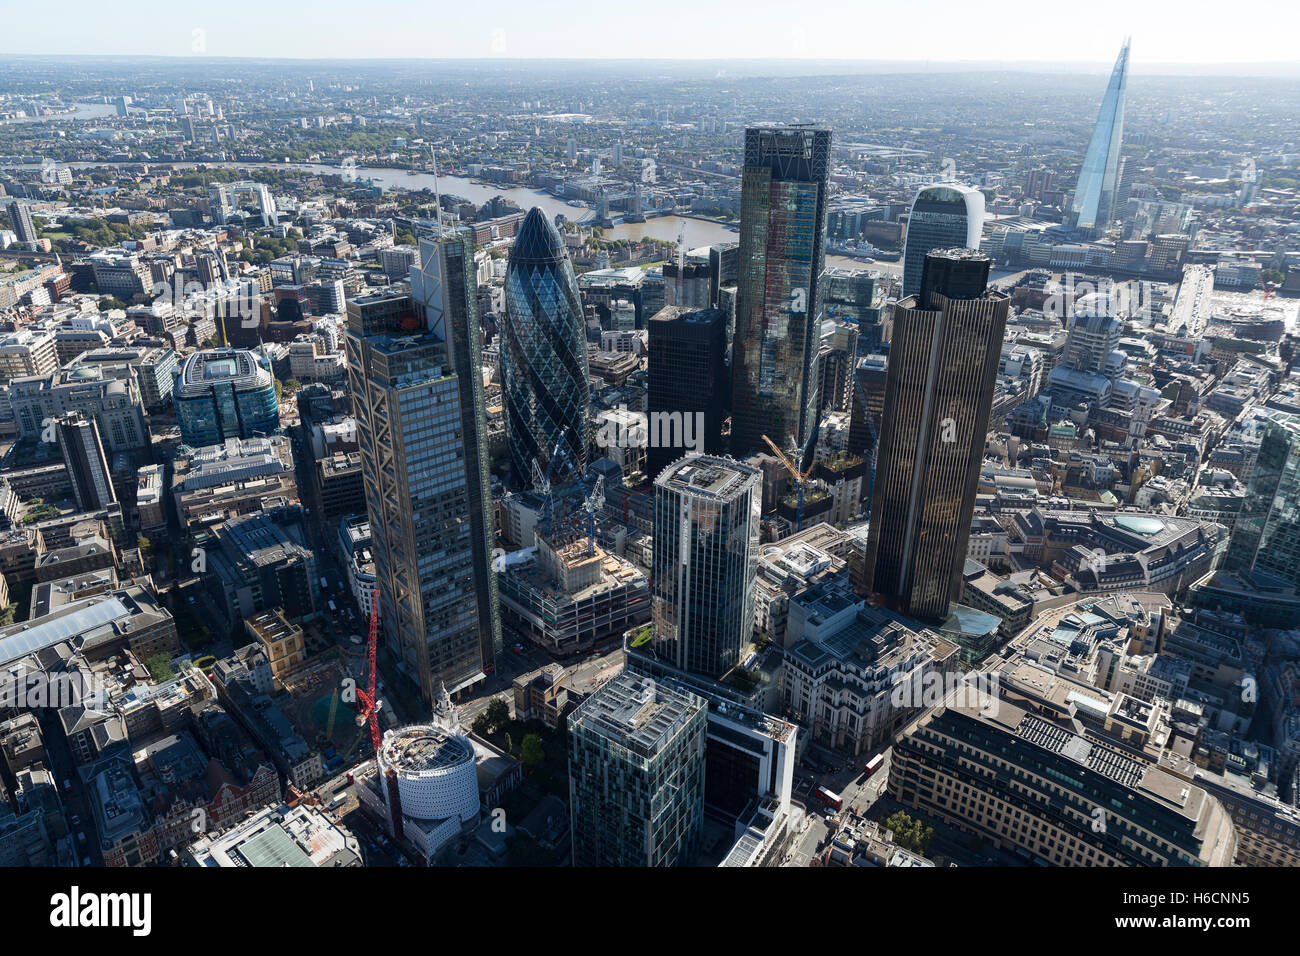 The tall buildings in The City of London, Moorgate. Stock Photo